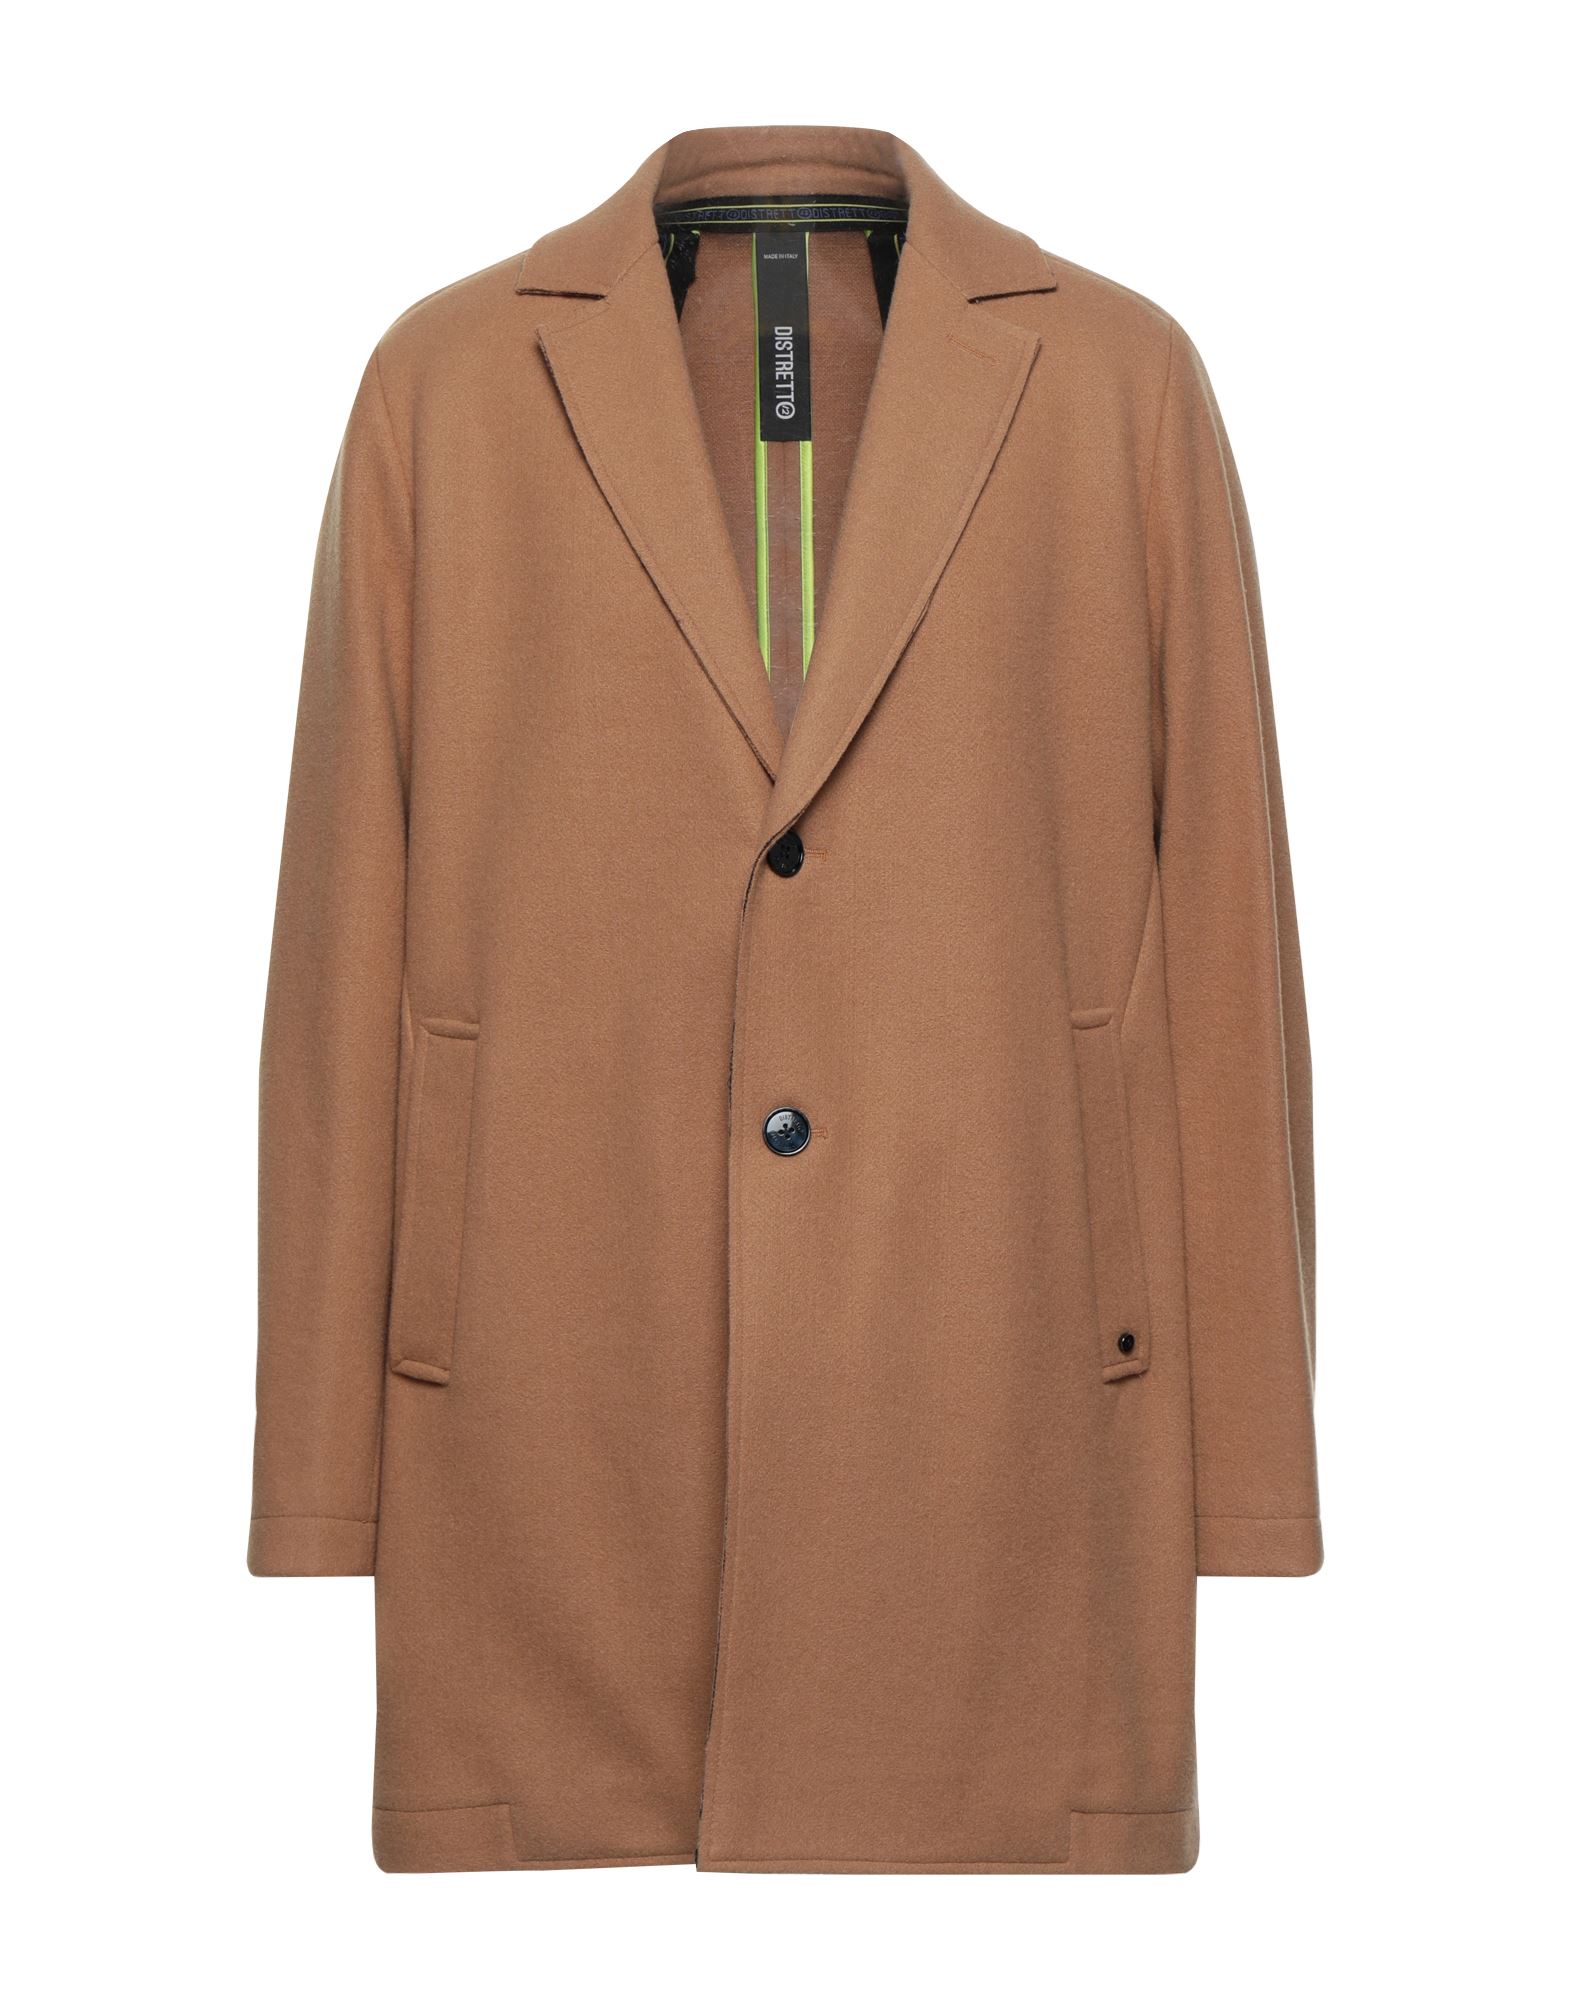 Distretto 12 Coats In Camel